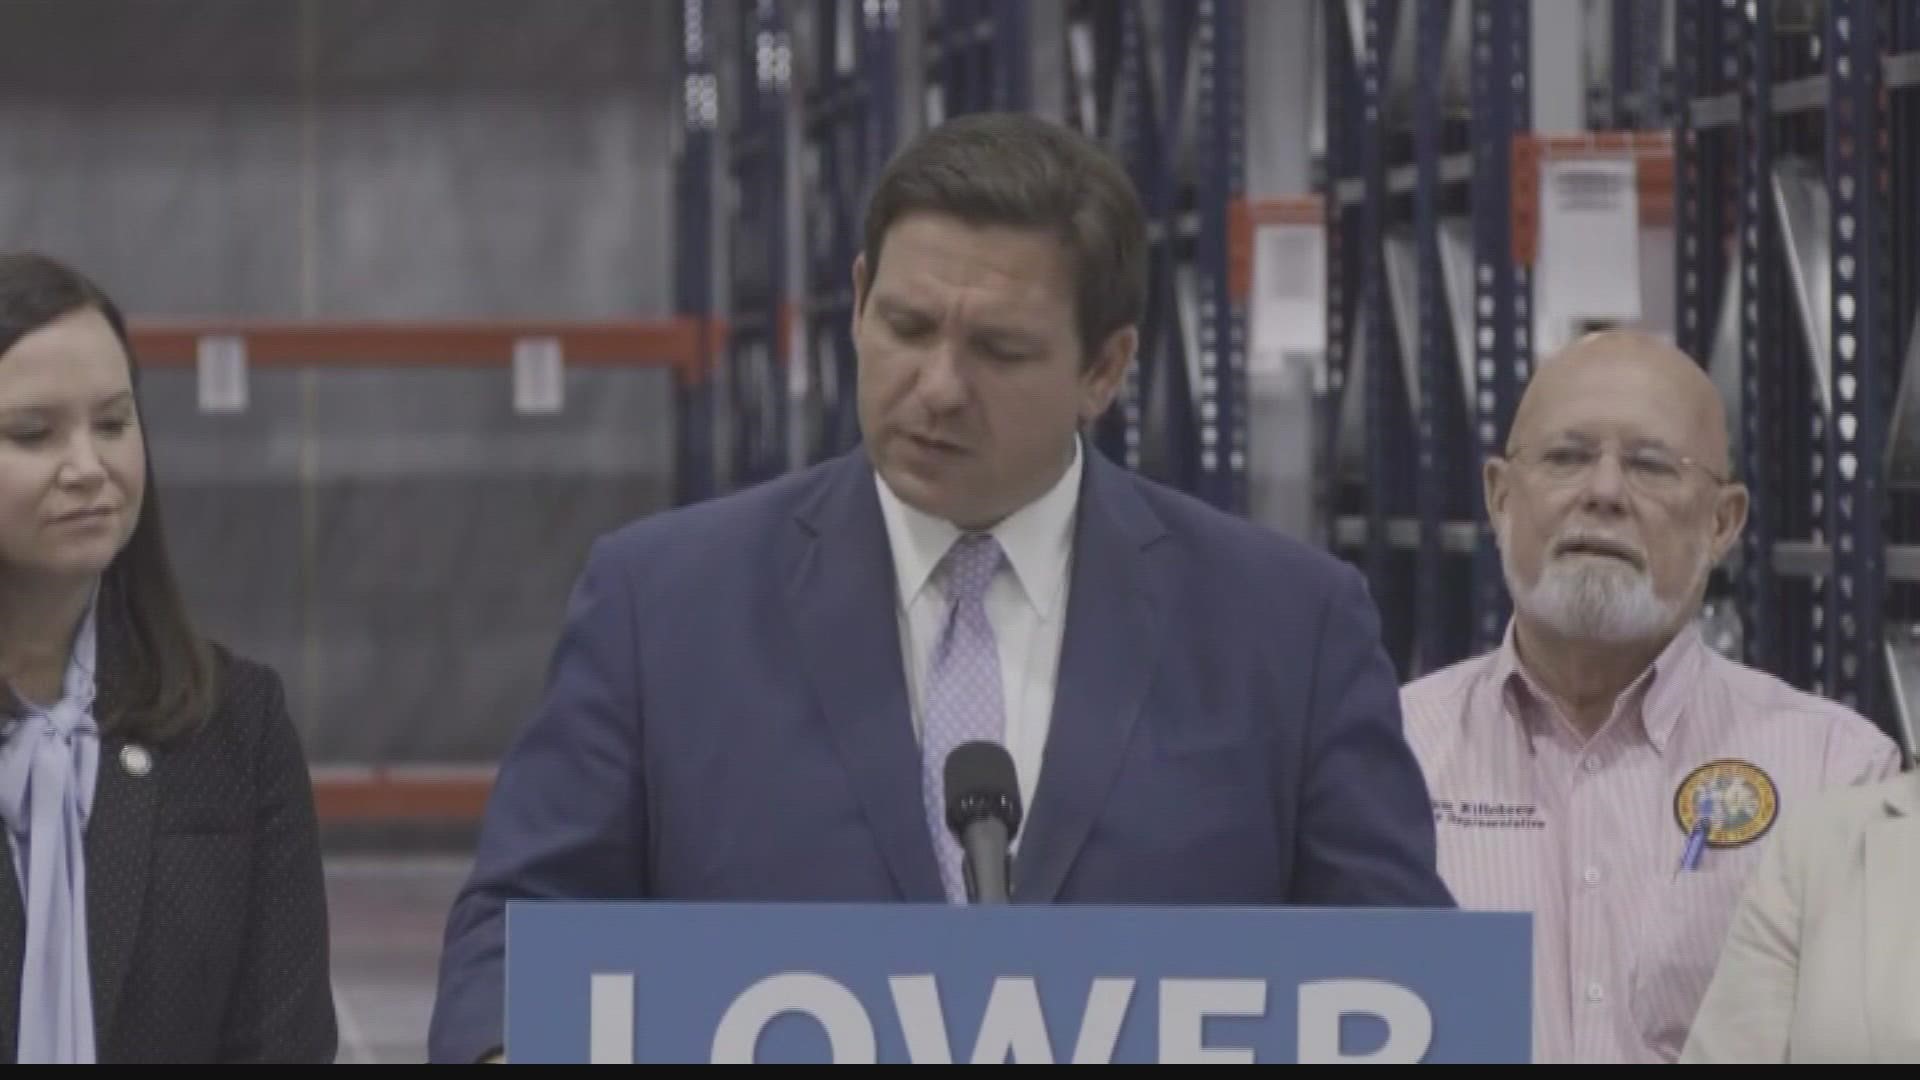 Governor DeSantis says the agency did not comply with public records request.